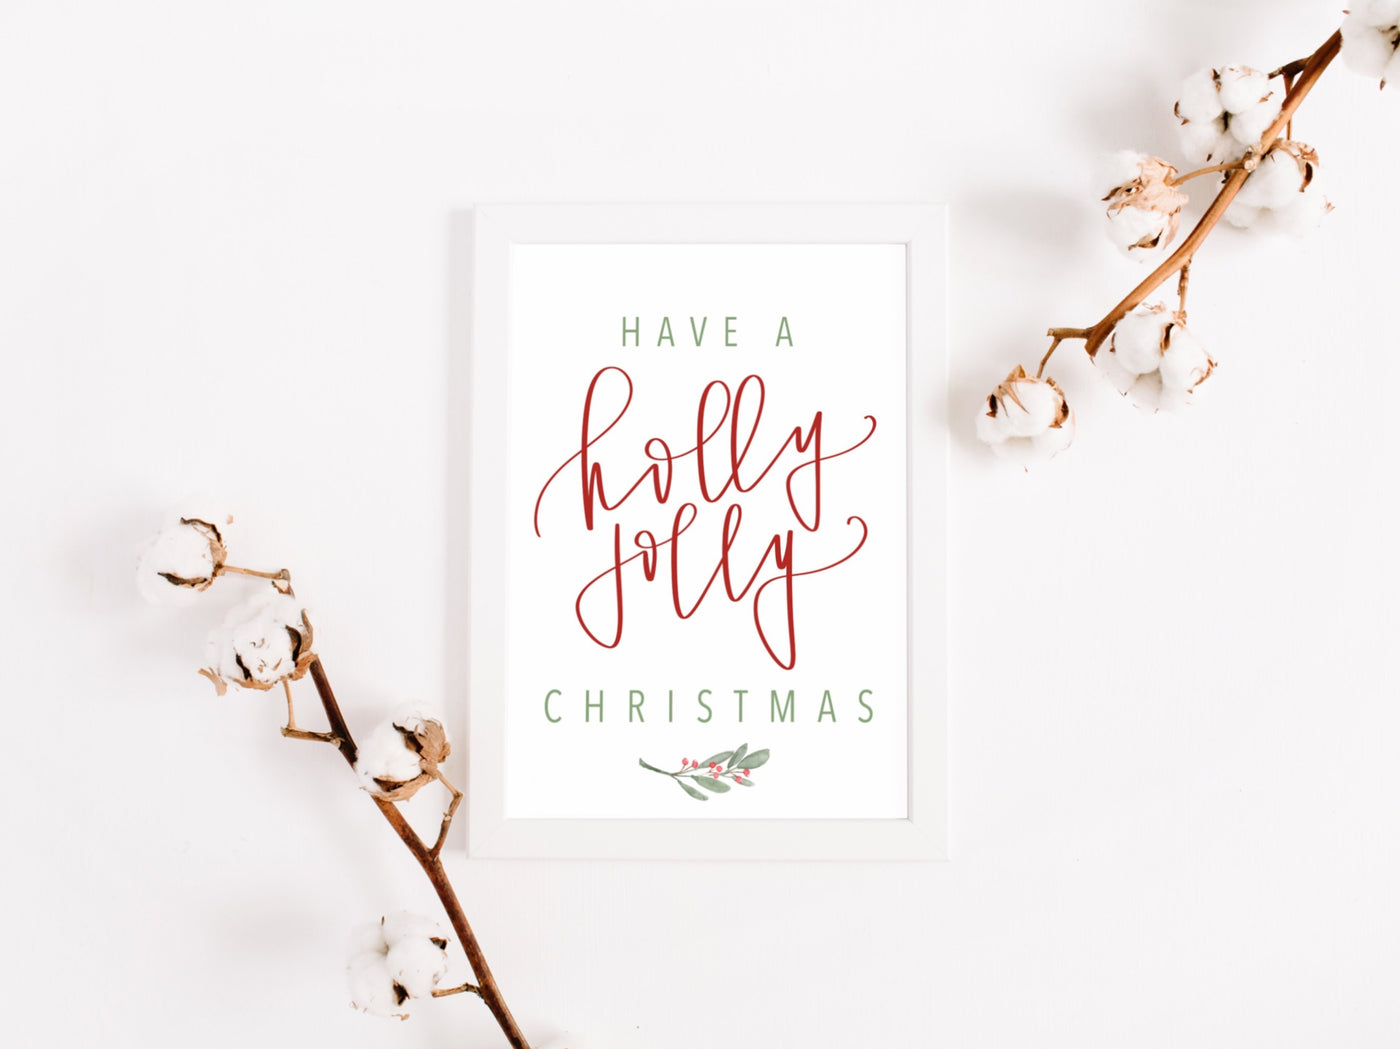 The Snuggle is Real (Red) Christmas Gift Tag – Creative Fusion